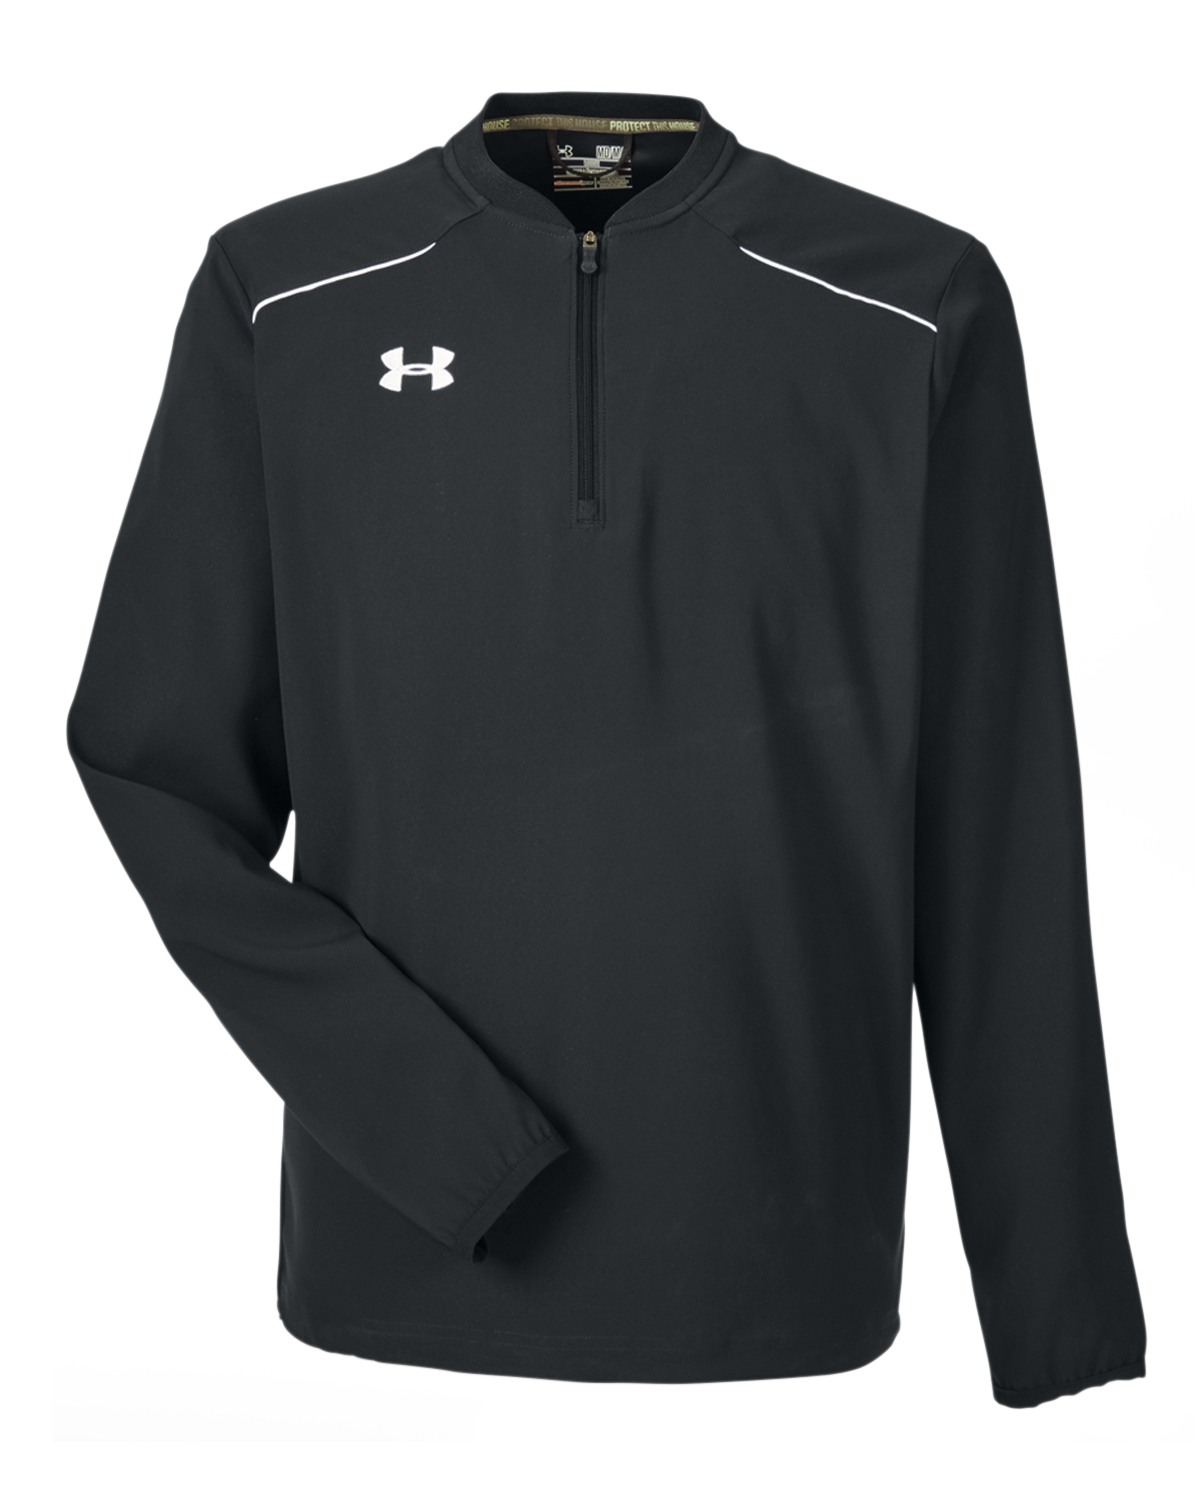 Under Armour 1252003 - Men's Ultimate Long Sleeve Windshirt